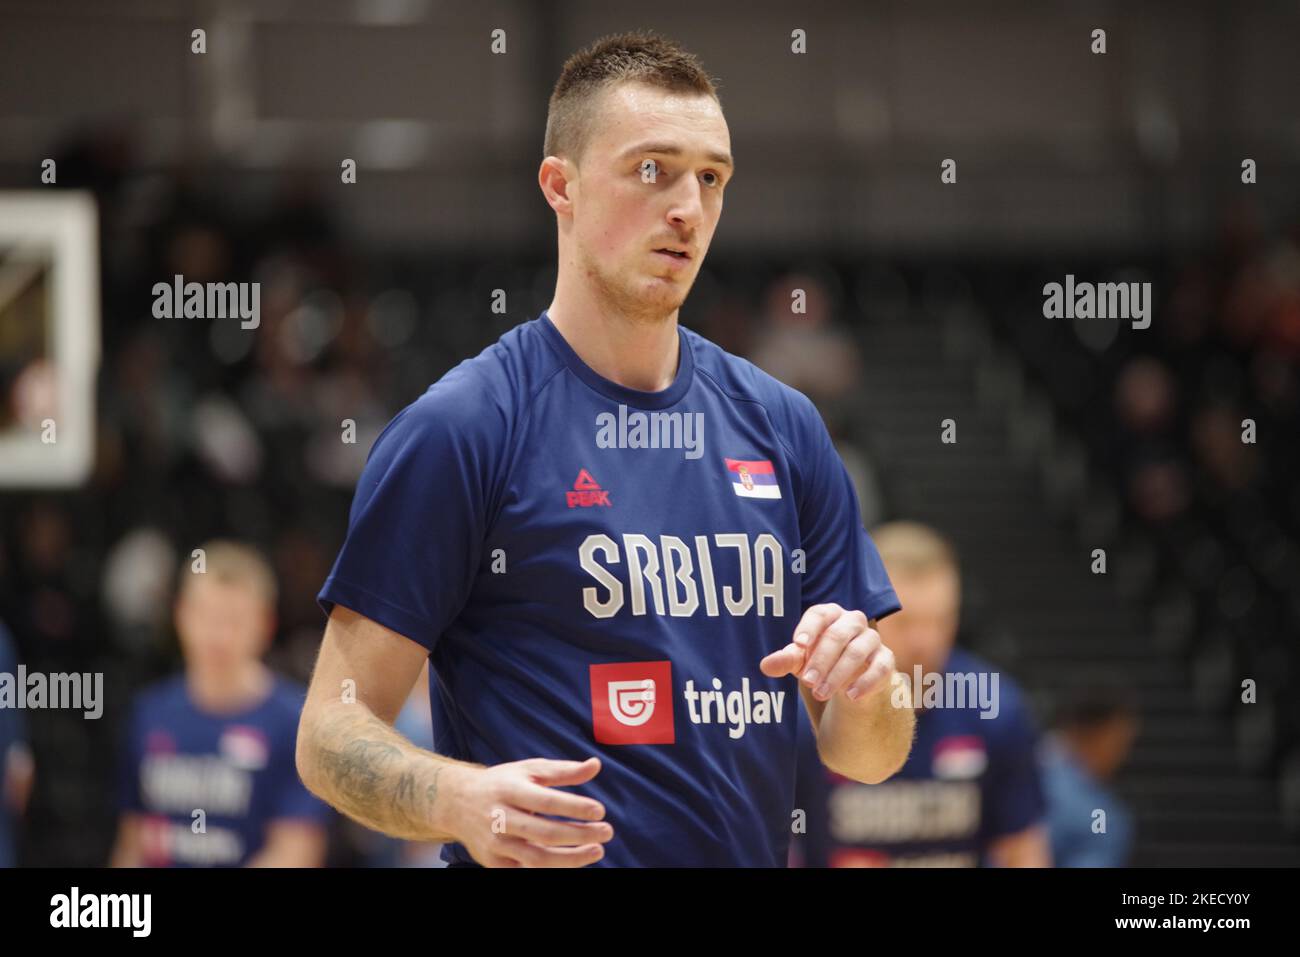 Newcastle upon Tyne, England, 11 November 2022. Danilo Andusic warming up for Serbia against Great Britain in the FIBA Basketball World Cup 2023 Qualifiers at the Vertu Motors Arena. Credit: Colin Edwards/Alamy Live News Stock Photo